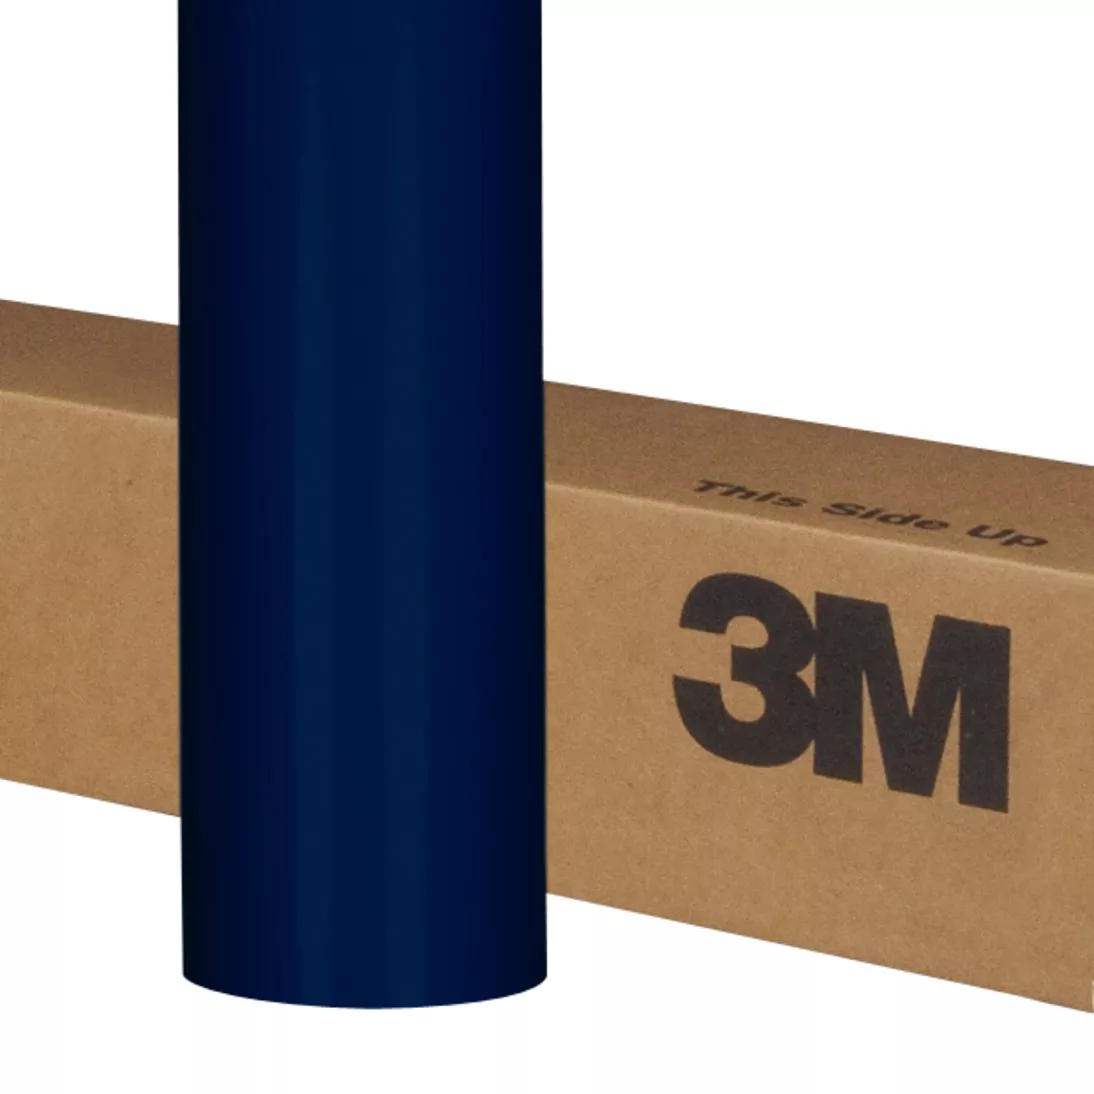 3M™ Scotchcal™ ElectroCut™ Graphic Film 7125-197, Light Navy, 48 in x
250 yd